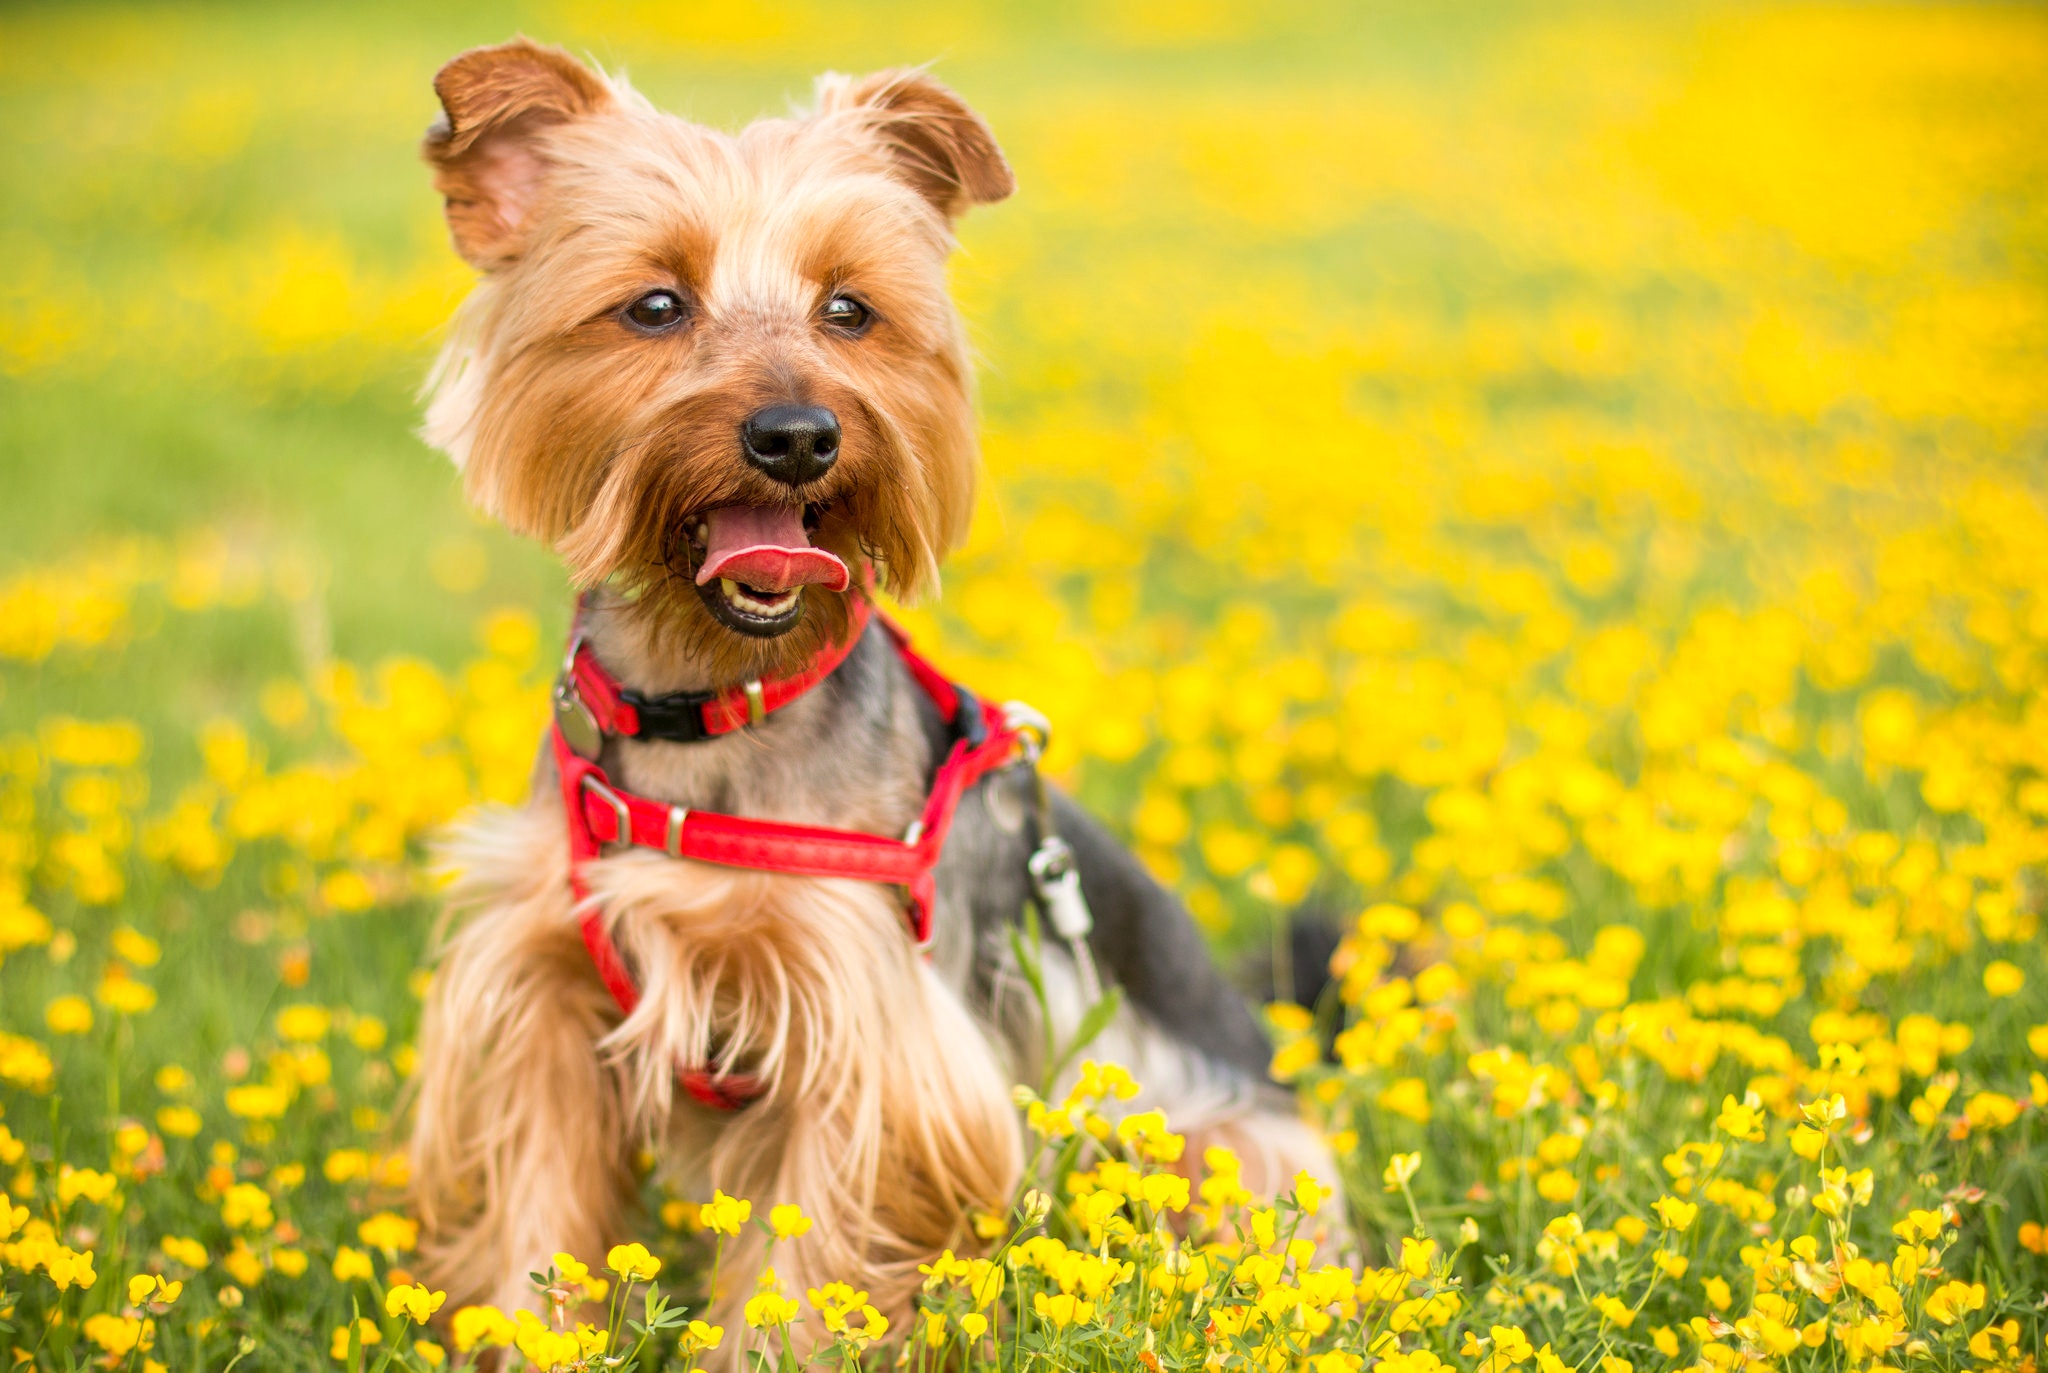 Tan and black yorkshire terrier photo